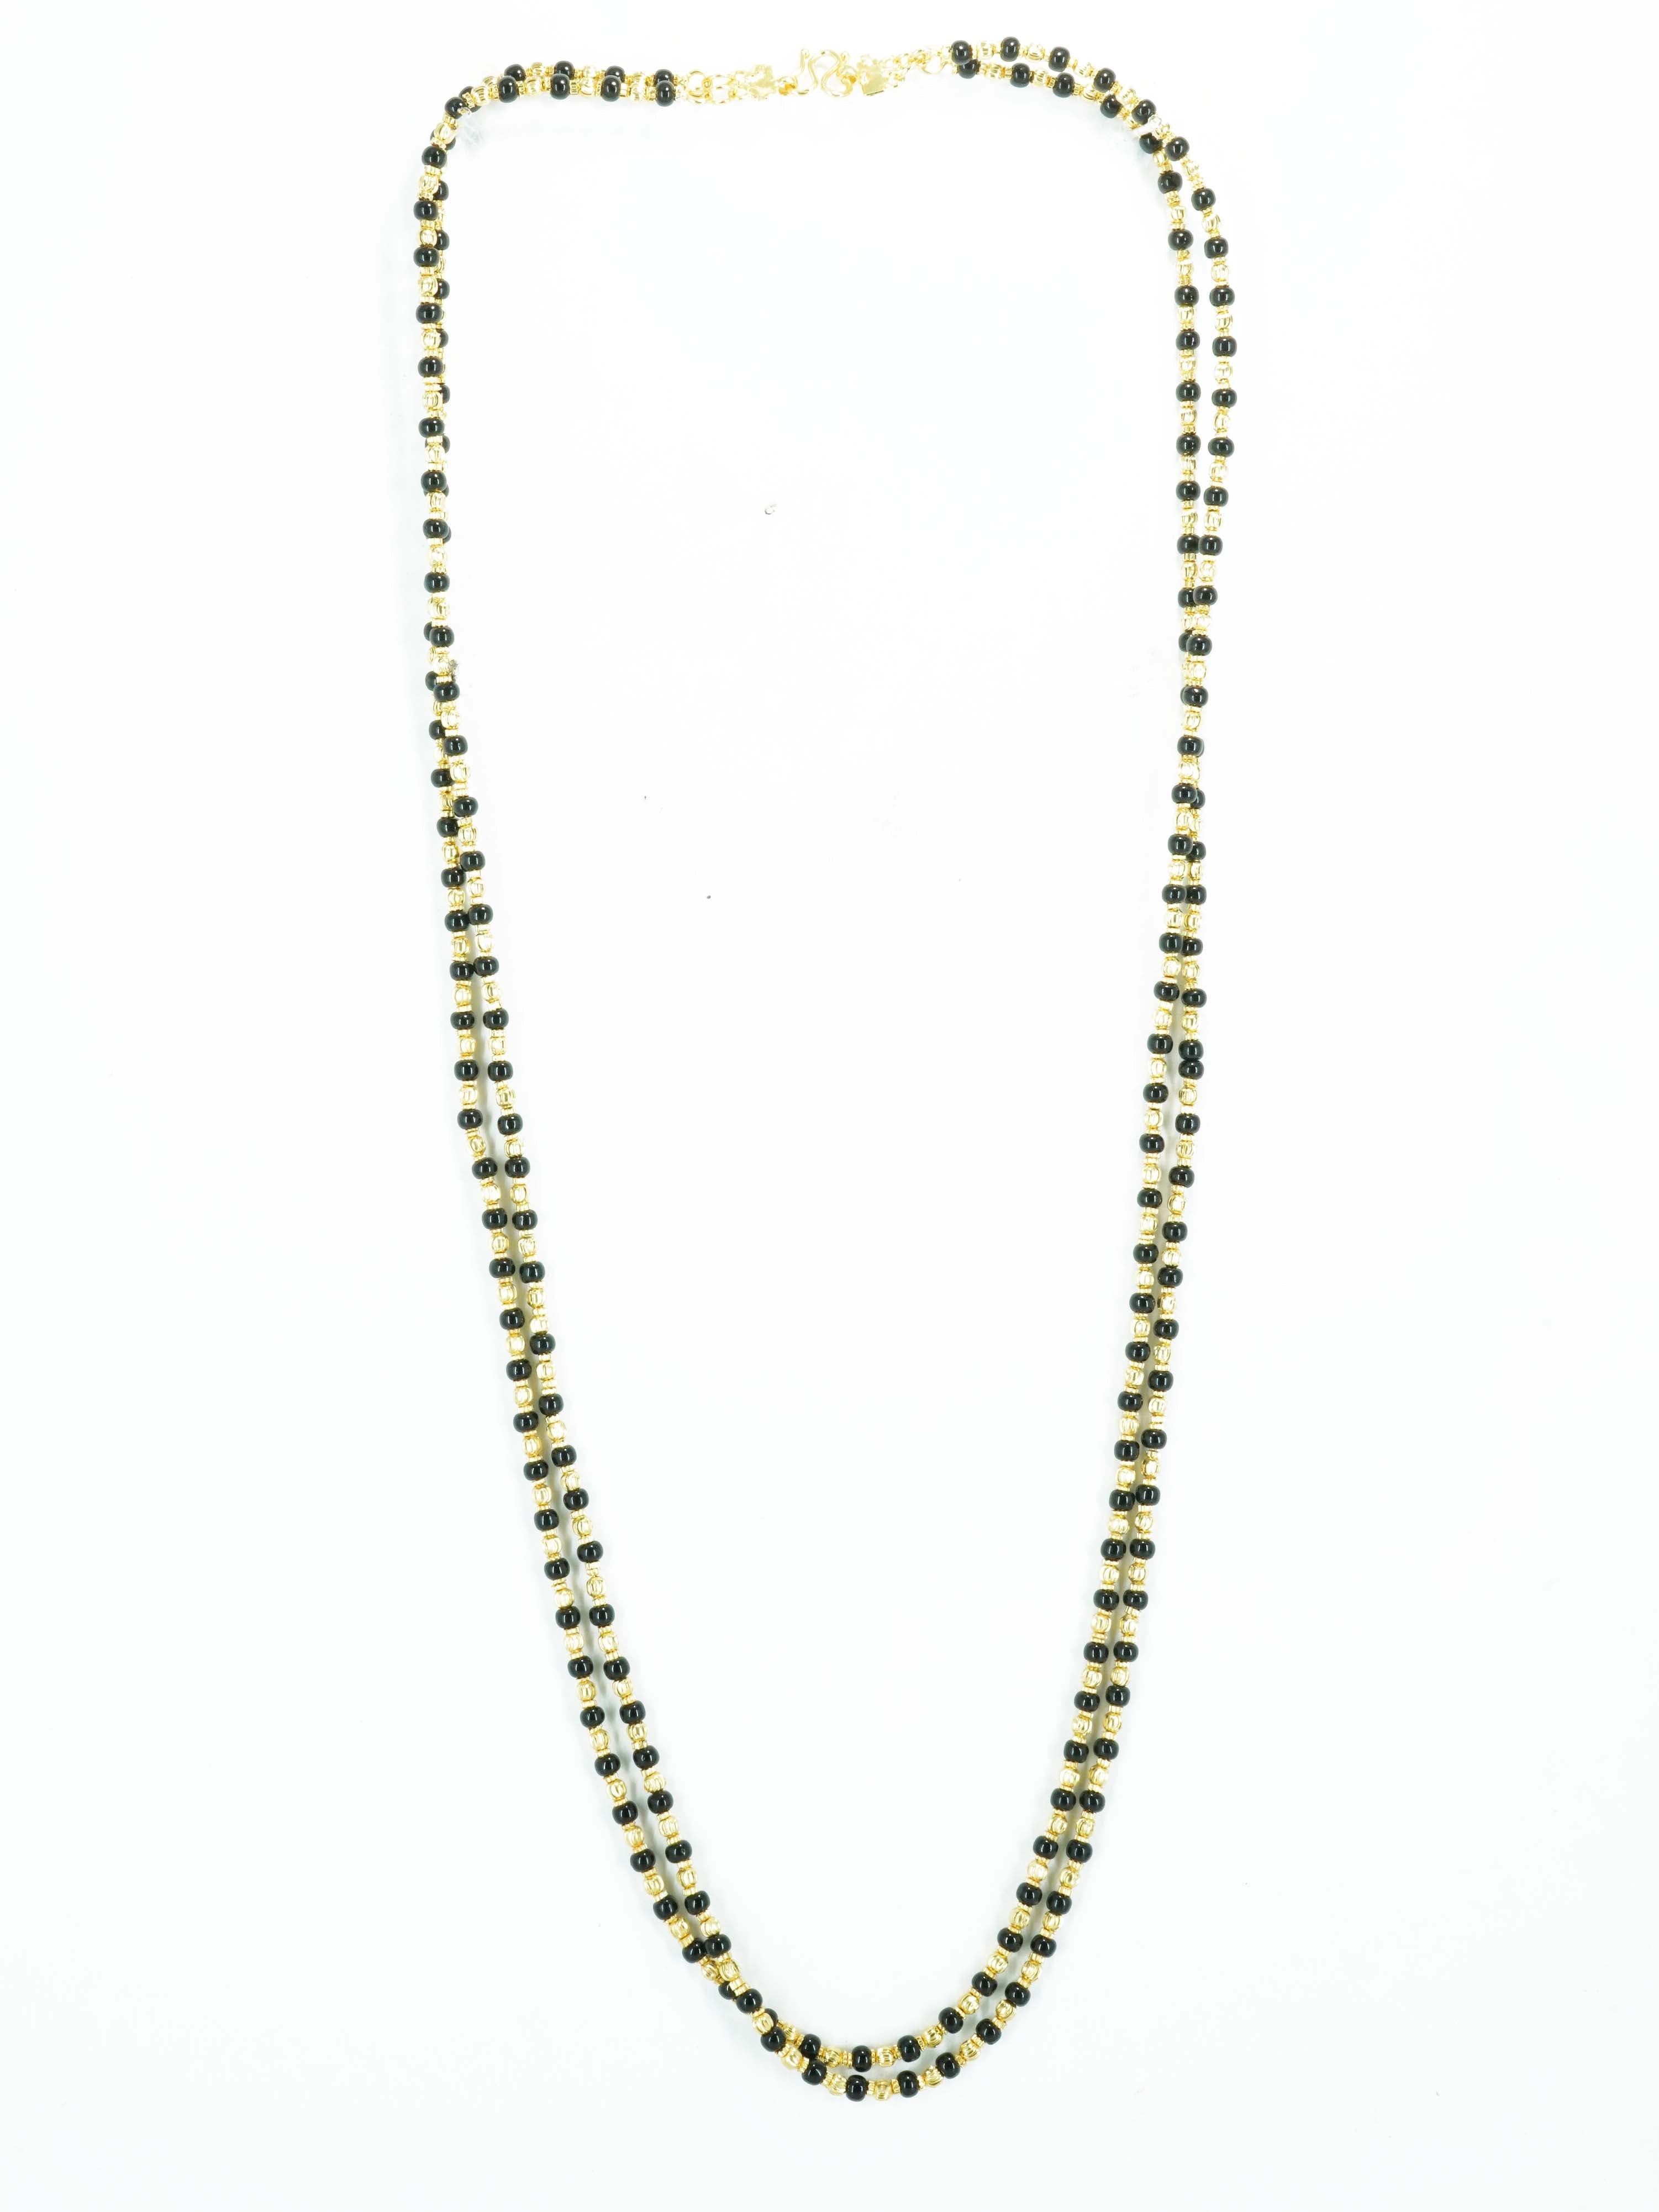 1 gm Micro gold plated 2 Line designer 30 inches chain with black beads 10643N